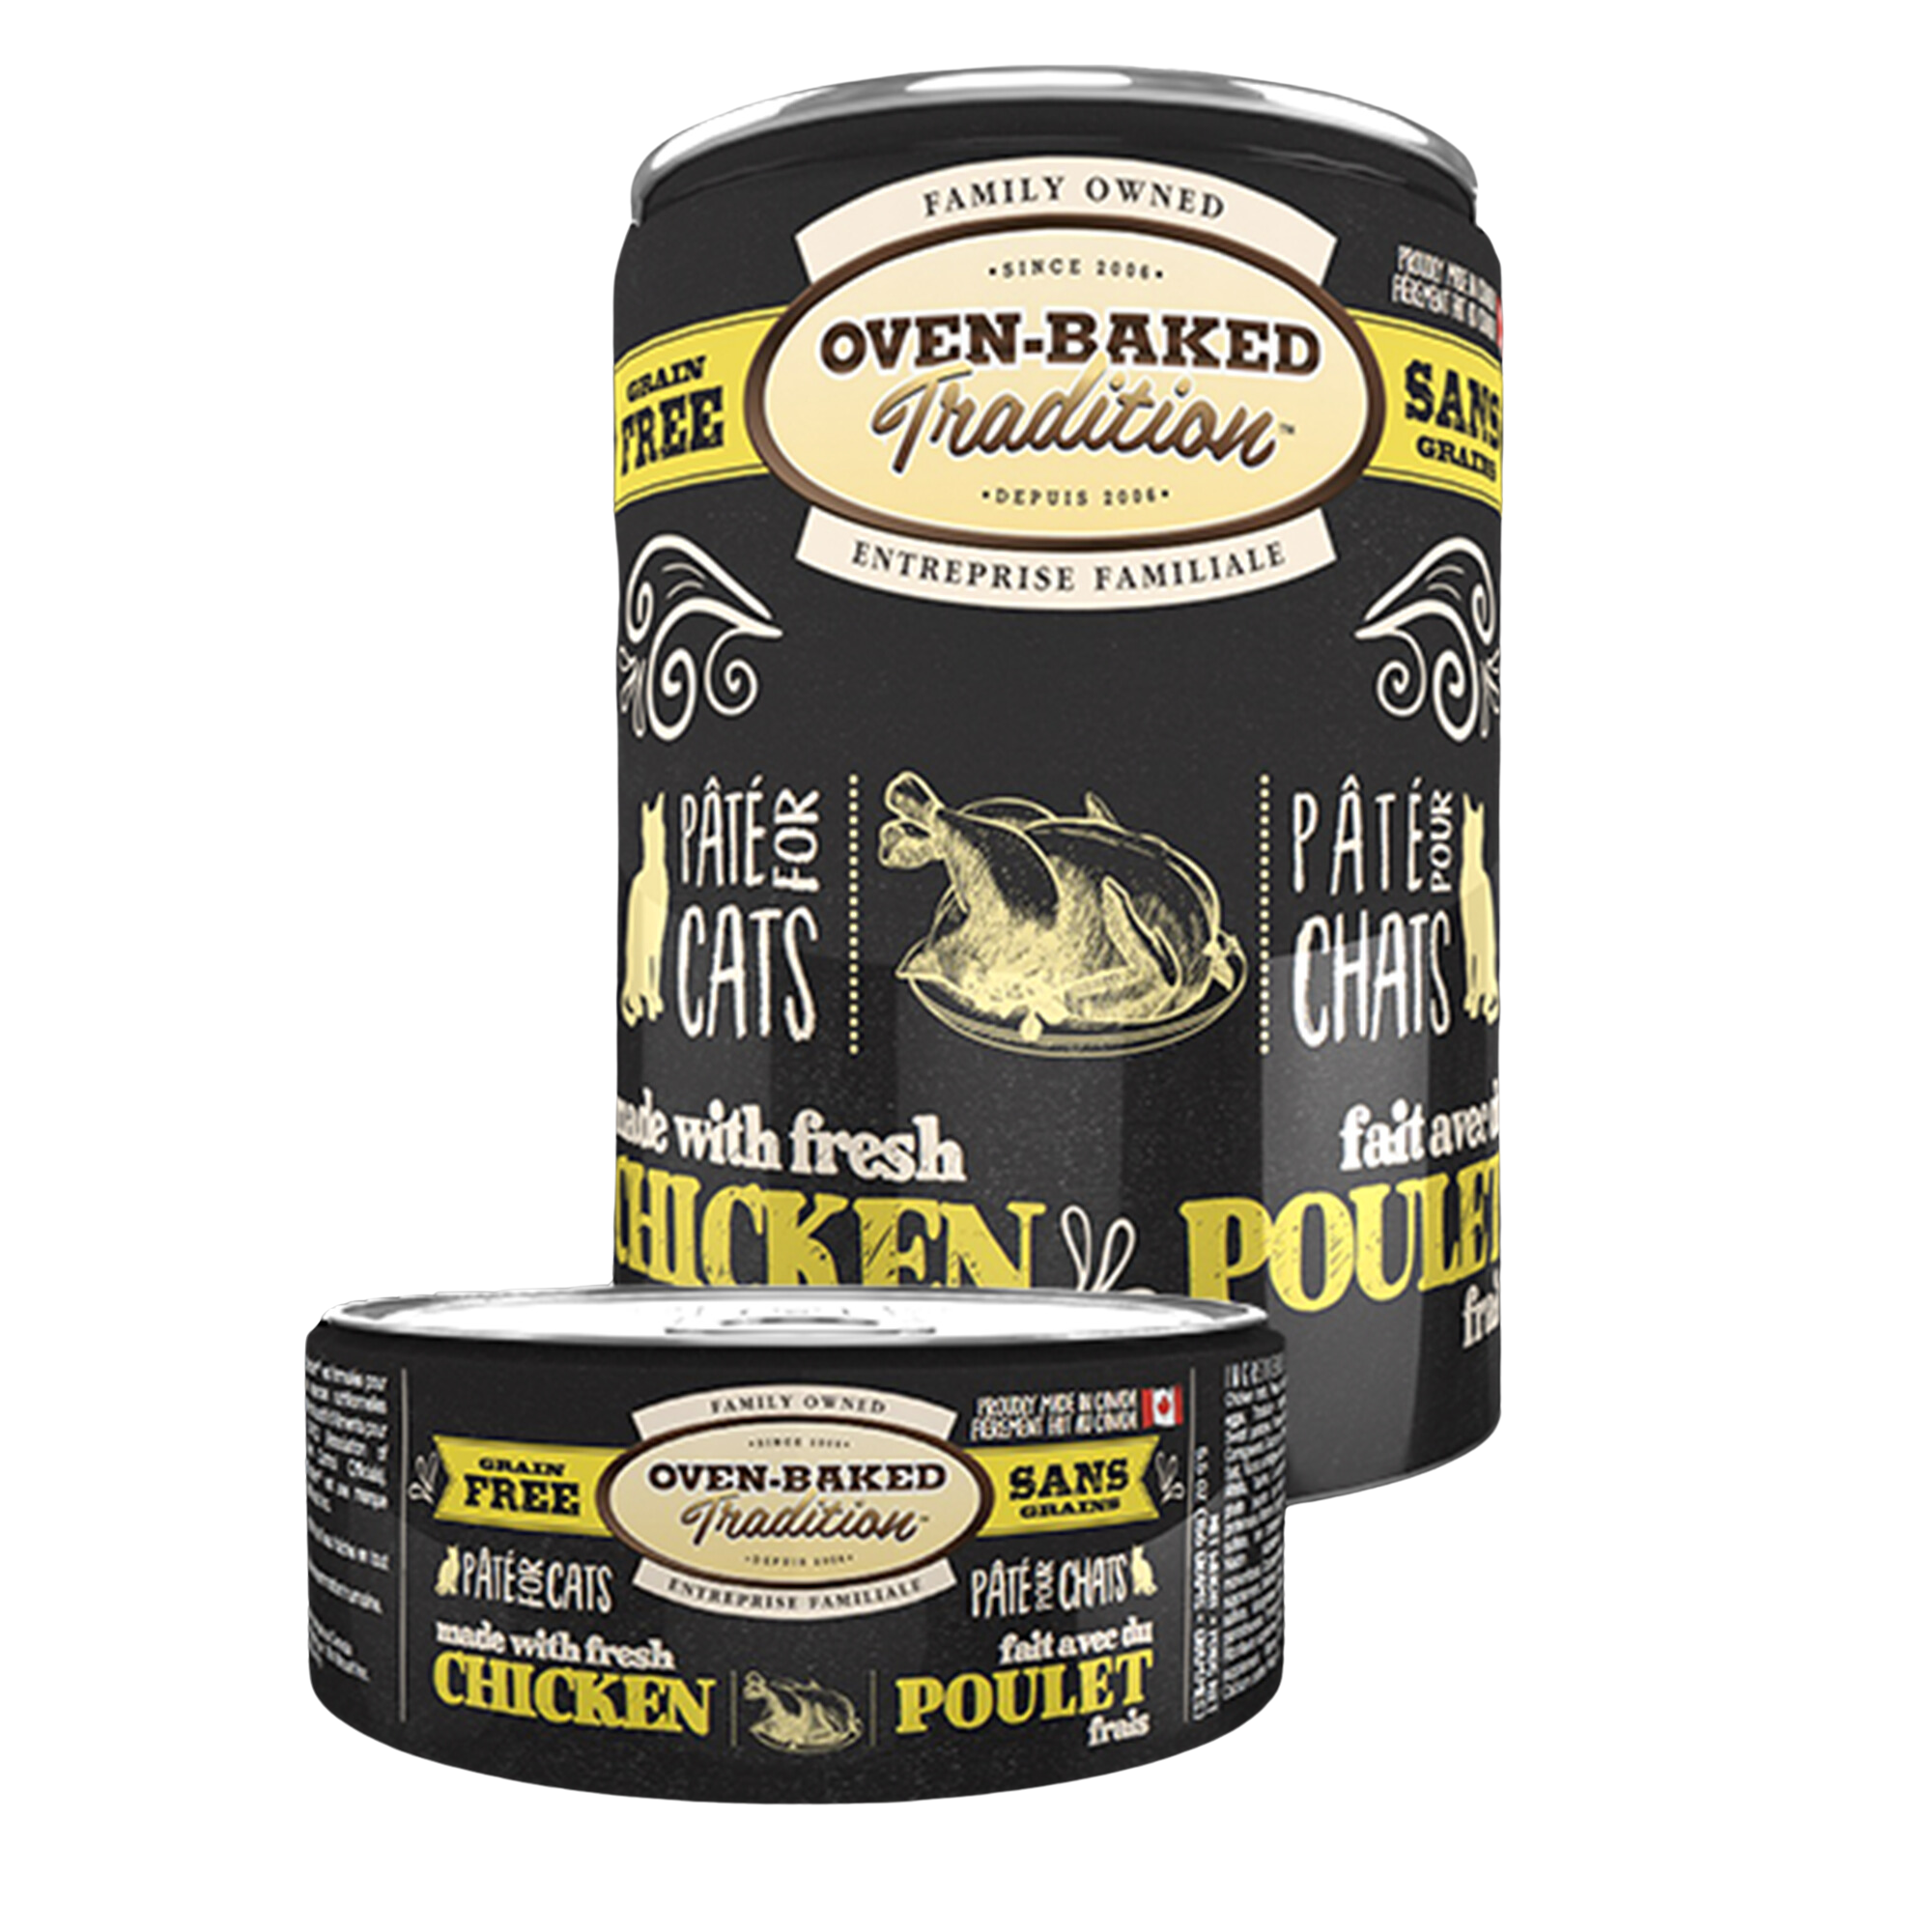 Oven-Baked Tradition Cat Food, Grain-Free, Chicken Pate